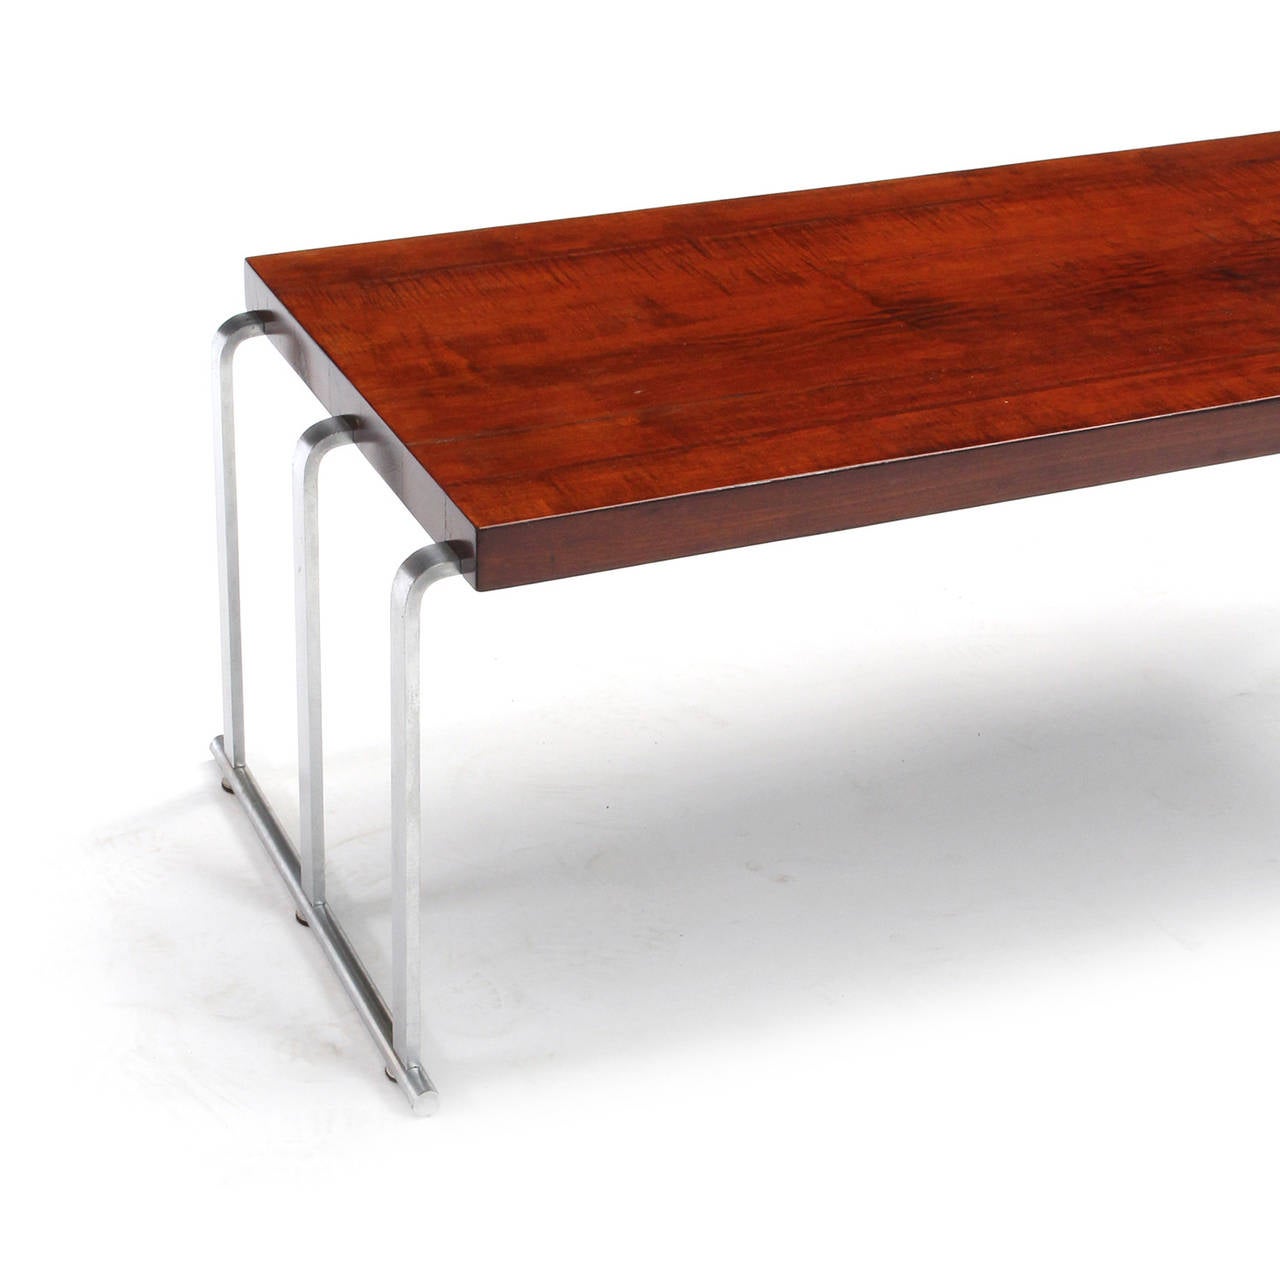 1930s Art Deco Mahogany Low Table by Gilbert Rohde for Herman Miller For Sale 1